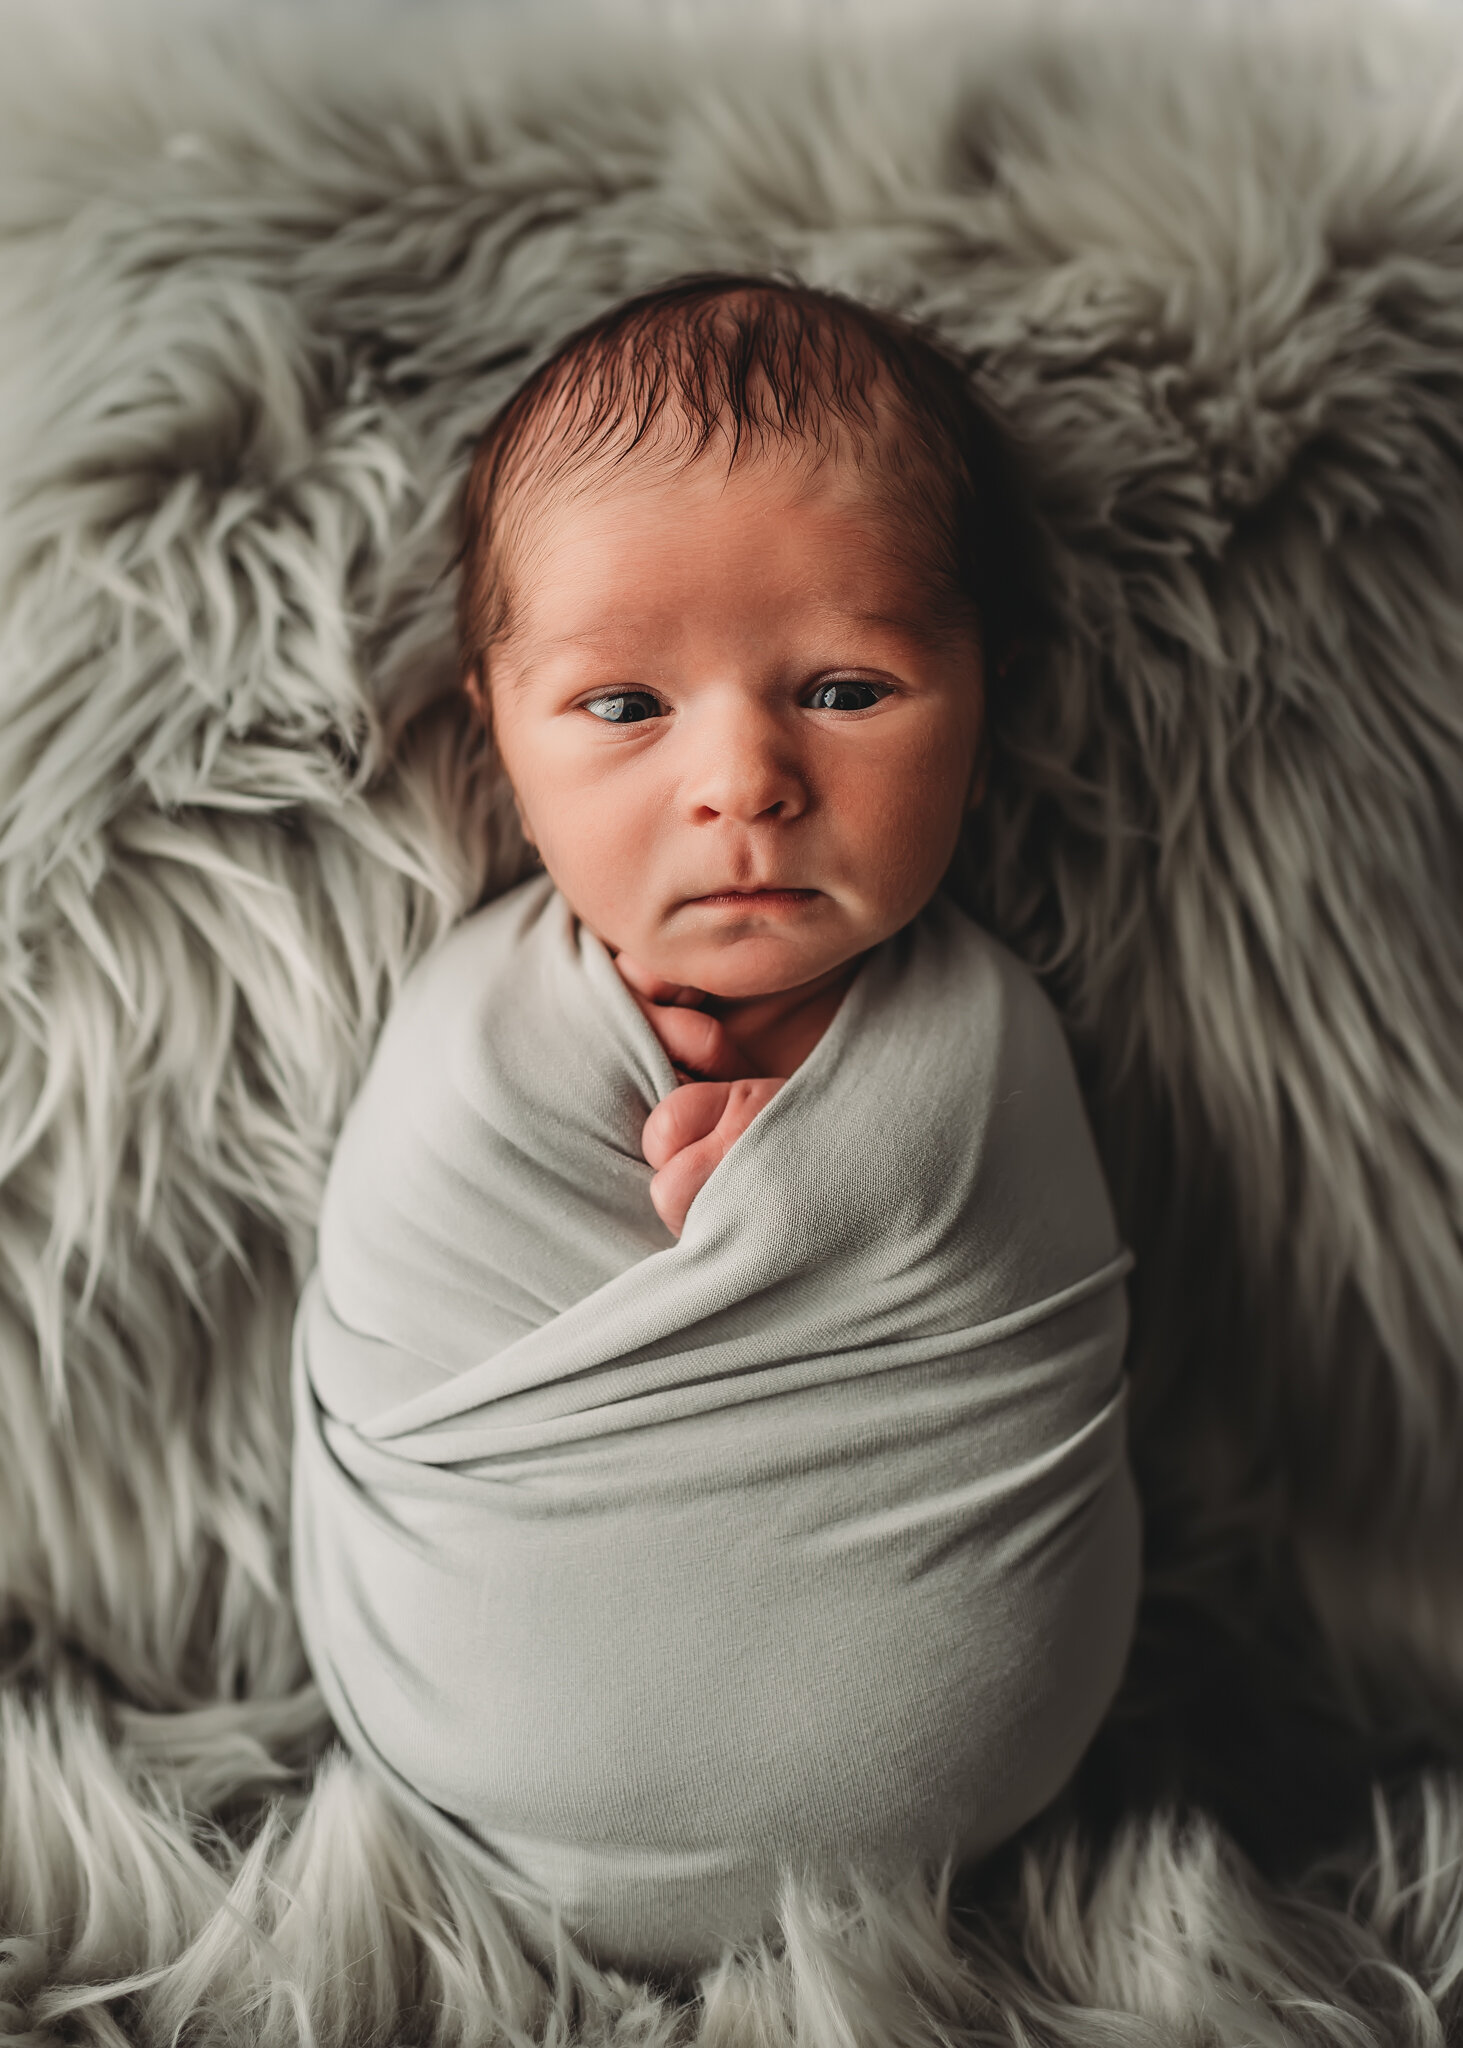 Peoria Newborn Photographer- Baby looks at camera while on grey rug